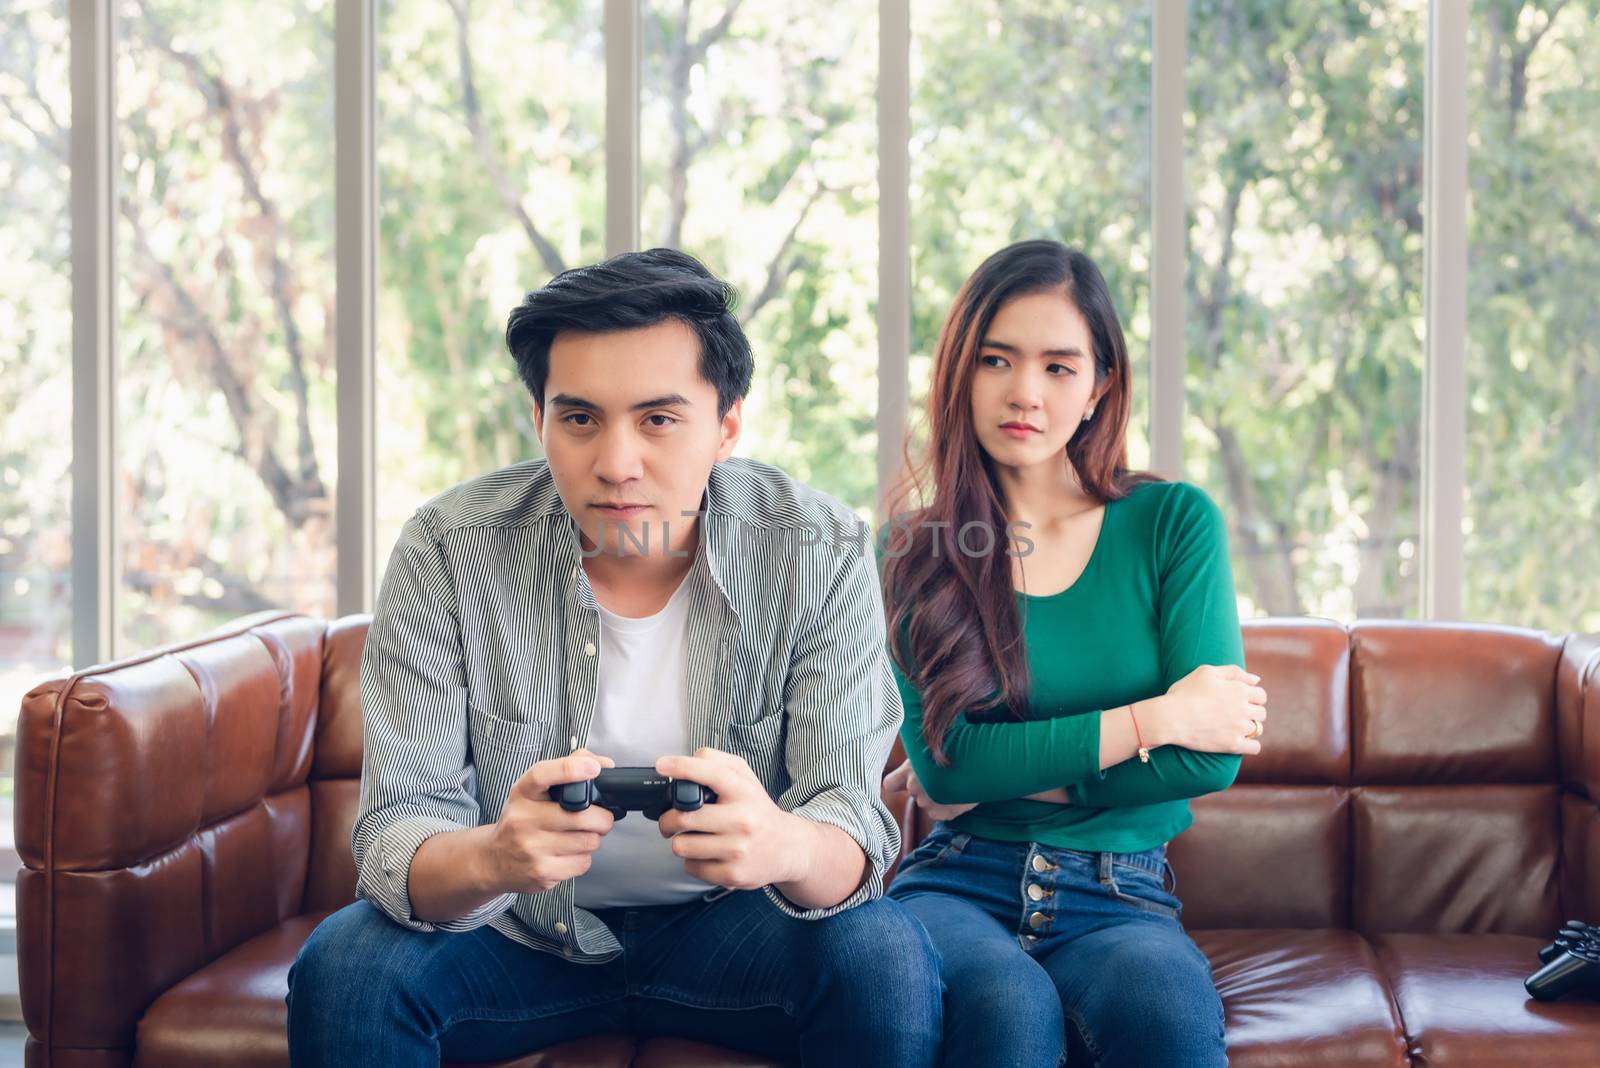 Portrait of Woman Feeling Offended With Her Boyfriend When He Playing Video Games While Sitting on The Couch in Living Room. Couple Love Relationship and Lifestyles Concept. by MahaHeang245789